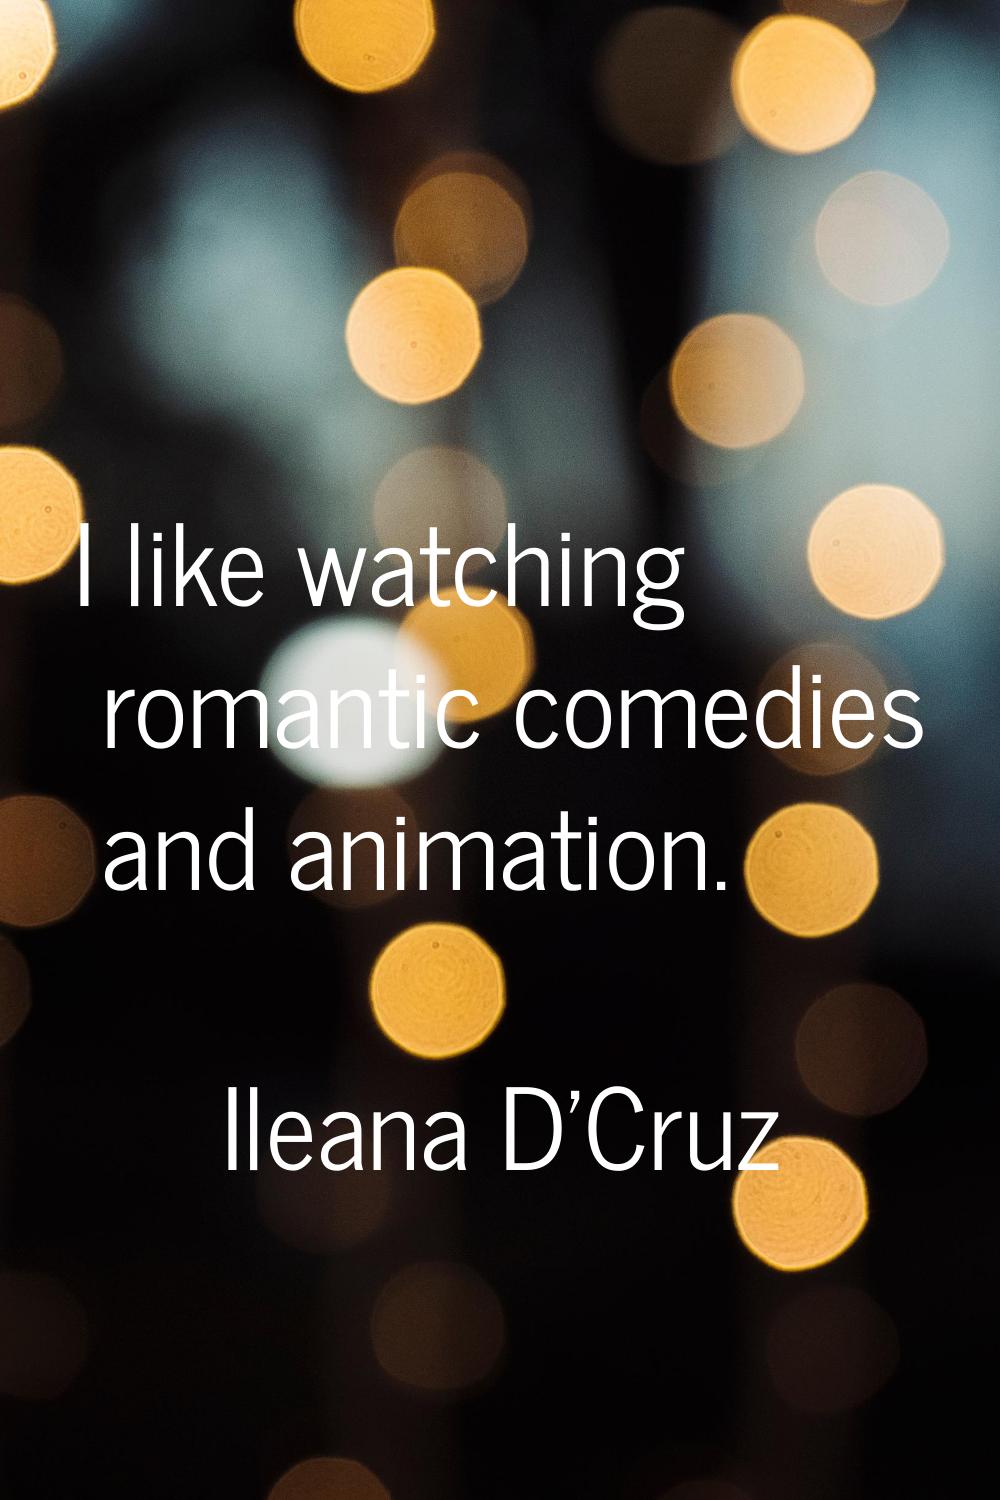 I like watching romantic comedies and animation.